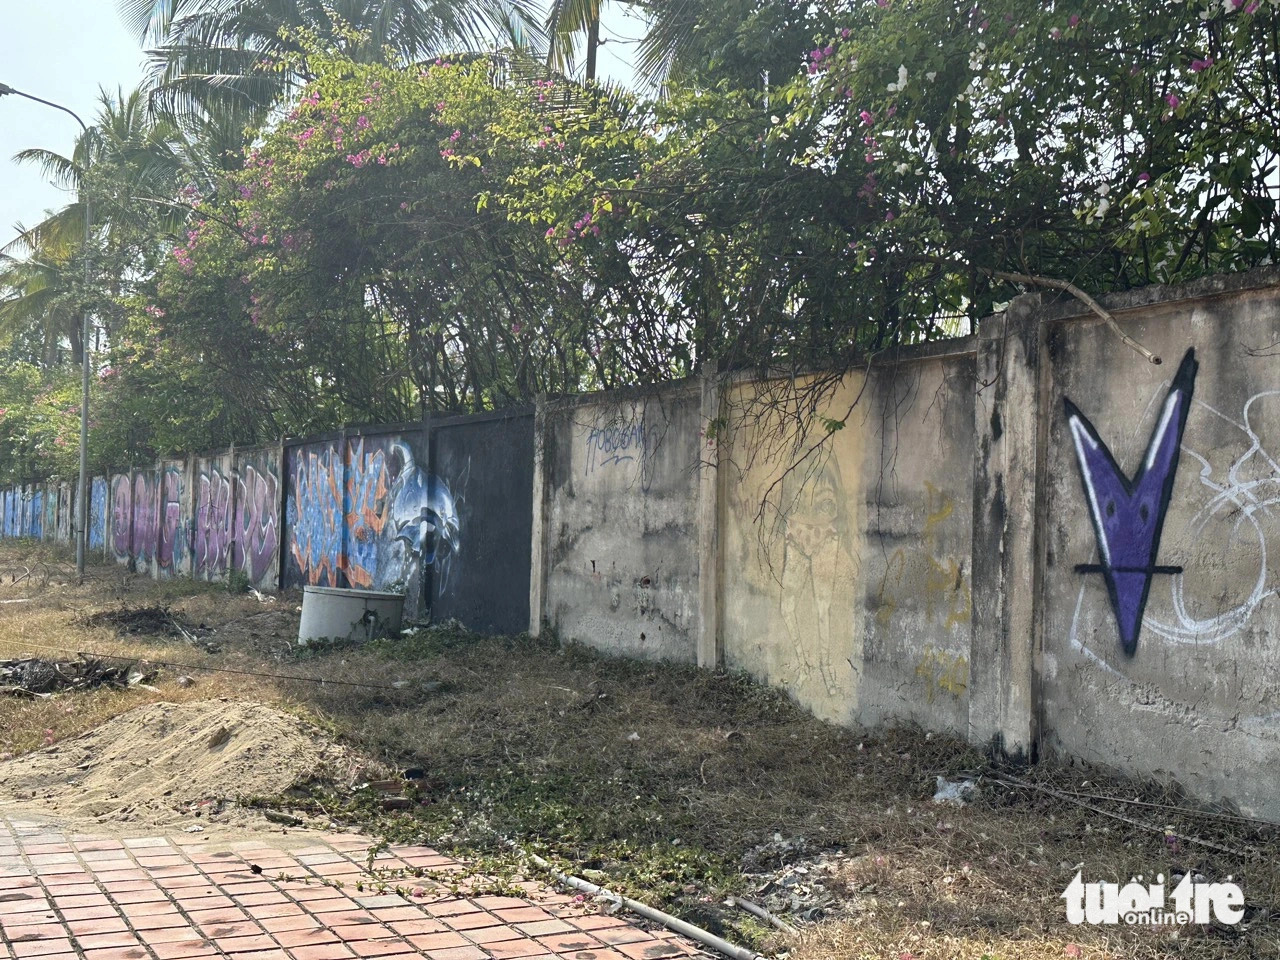 Graffiti reappeared on walls along pathways to Son Thuy Beach in Ngu Hanh Son District, Da Nang City, central Vietnam. Photo: Tuoi Tre